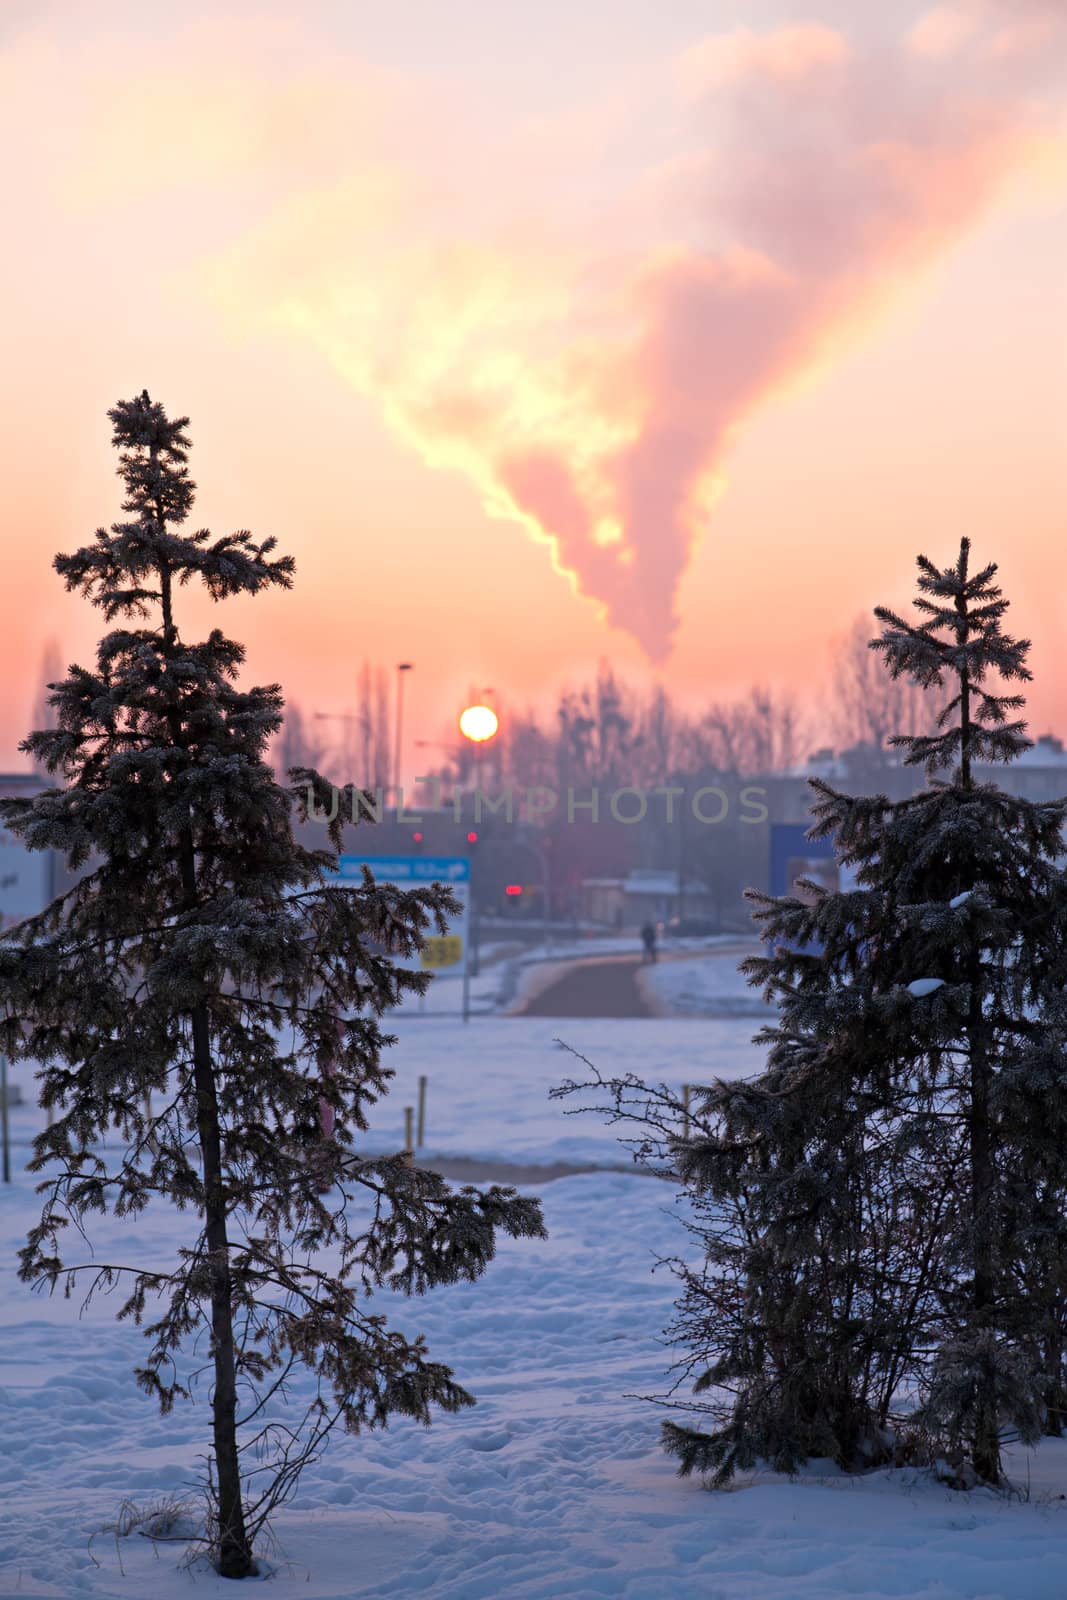 Pine trees against the industrial chimney and sunset
